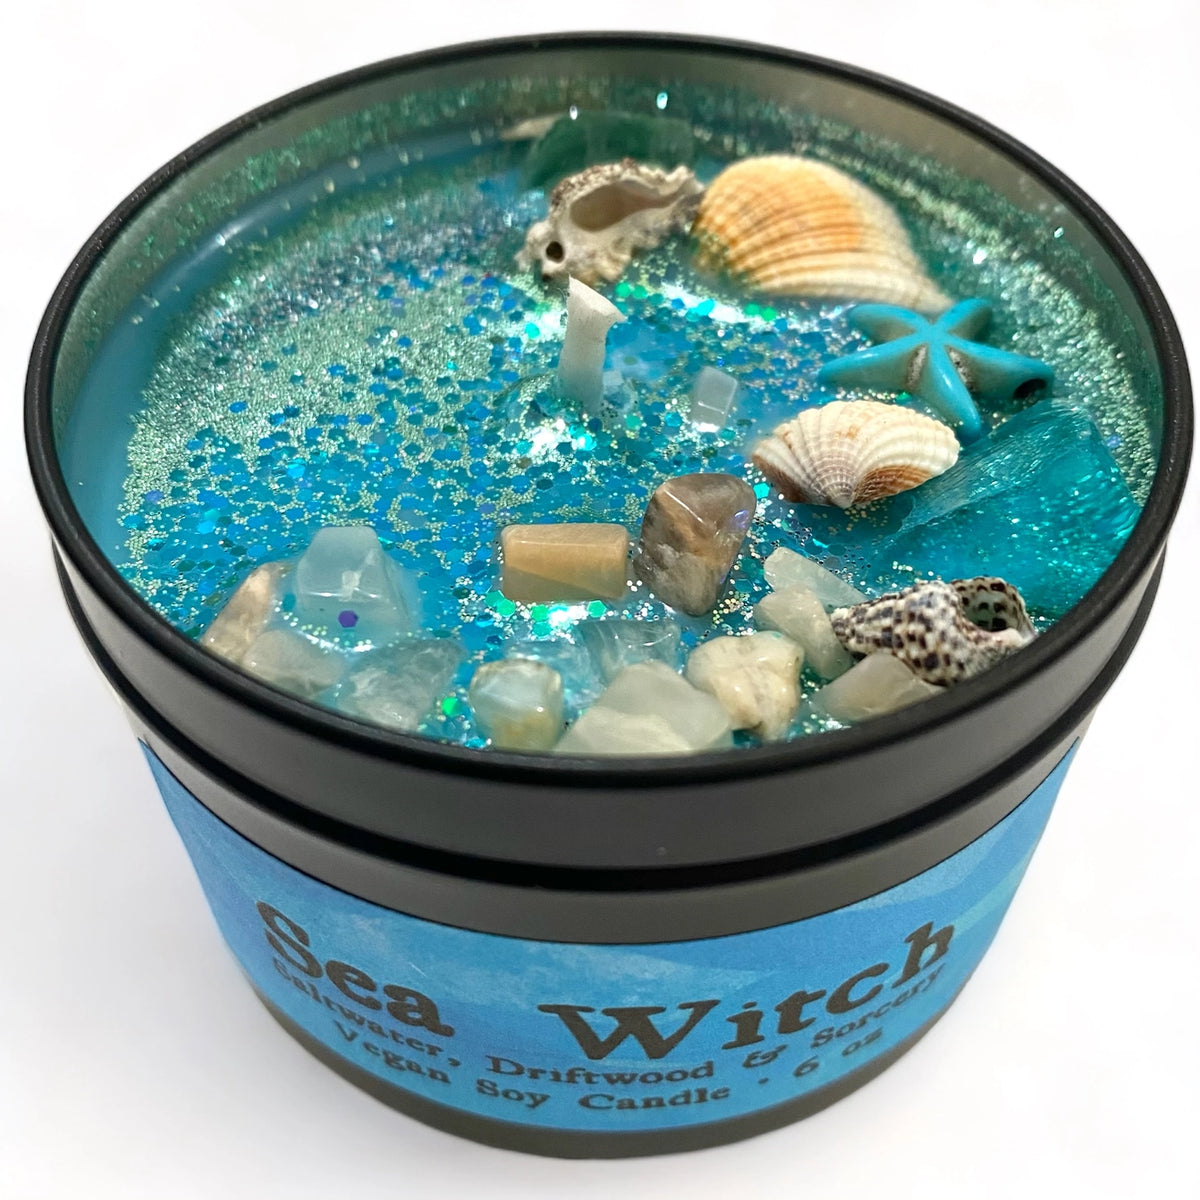 Sea Witch Candle Saltwater & Driftwood Scent Soy Candle